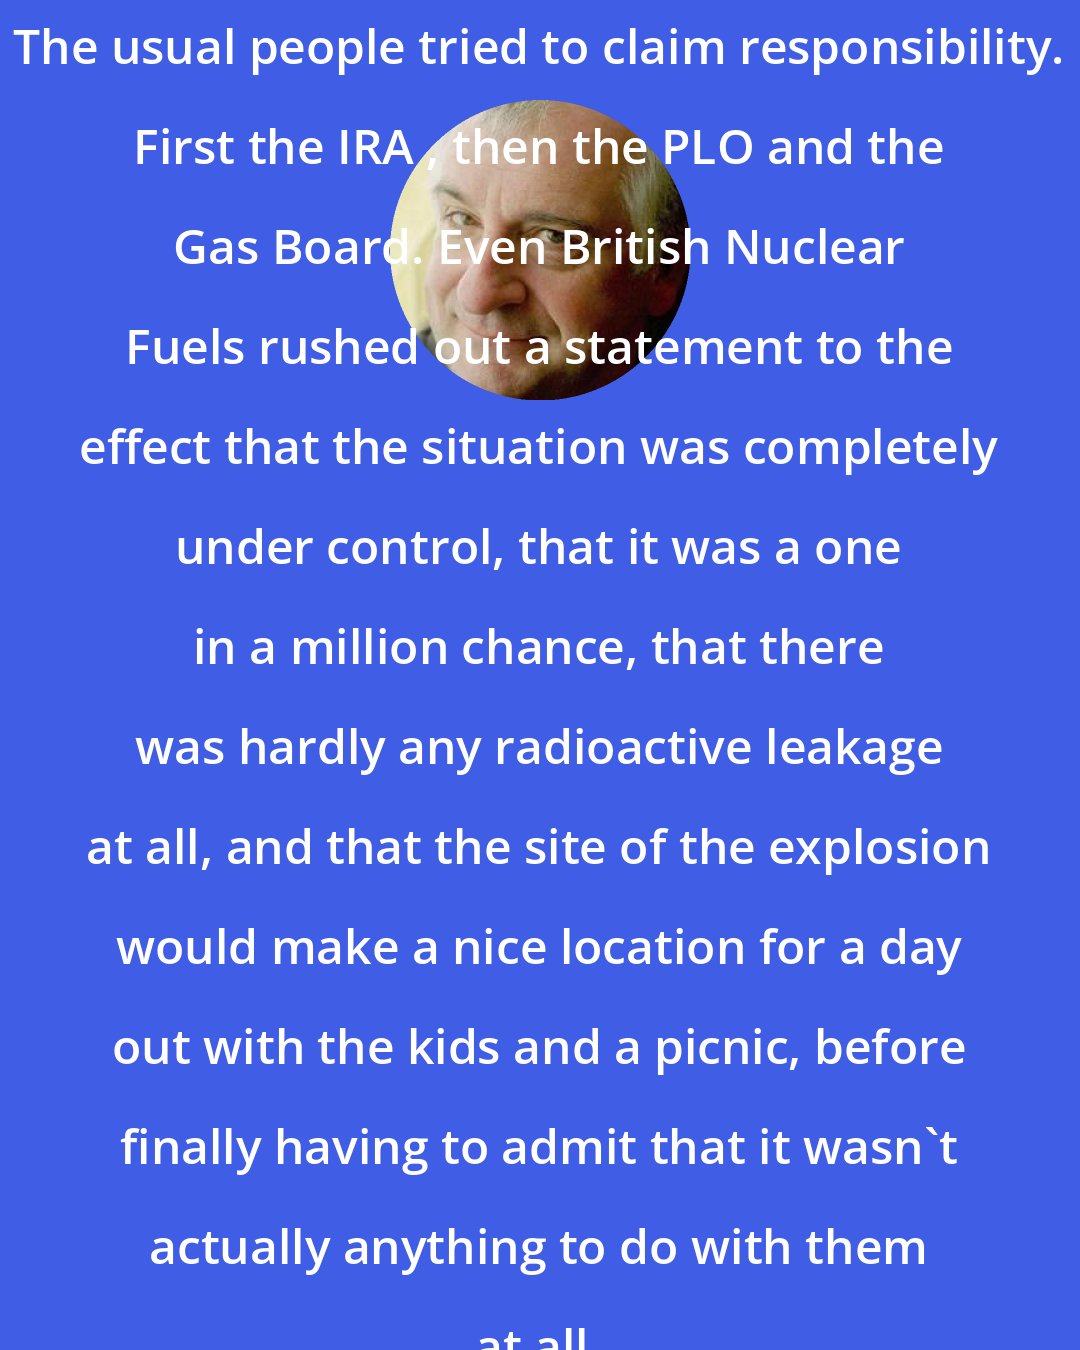 Douglas Adams: The usual people tried to claim responsibility. First the IRA , then the PLO and the Gas Board. Even British Nuclear Fuels rushed out a statement to the effect that the situation was completely under control, that it was a one in a million chance, that there was hardly any radioactive leakage at all, and that the site of the explosion would make a nice location for a day out with the kids and a picnic, before finally having to admit that it wasn't actually anything to do with them at all.